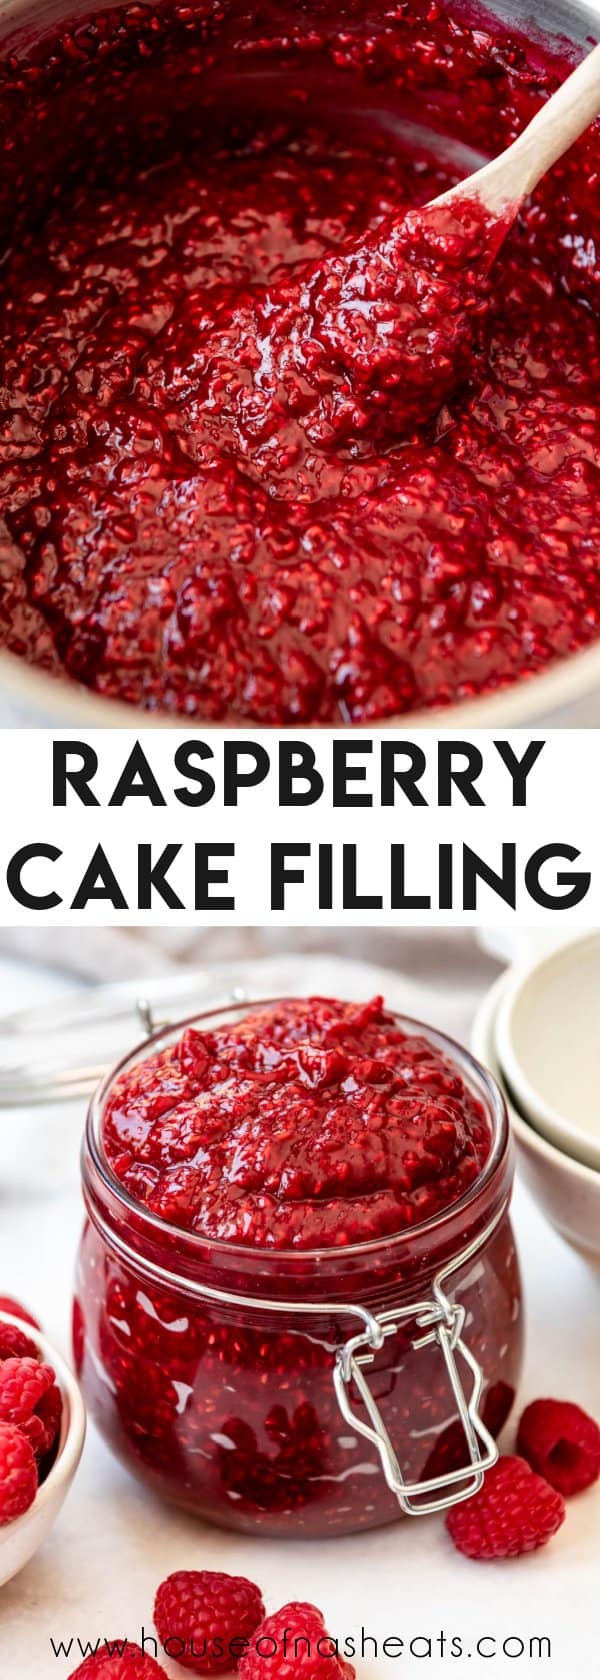 A collage of raspberry cake filling images with text overlay.